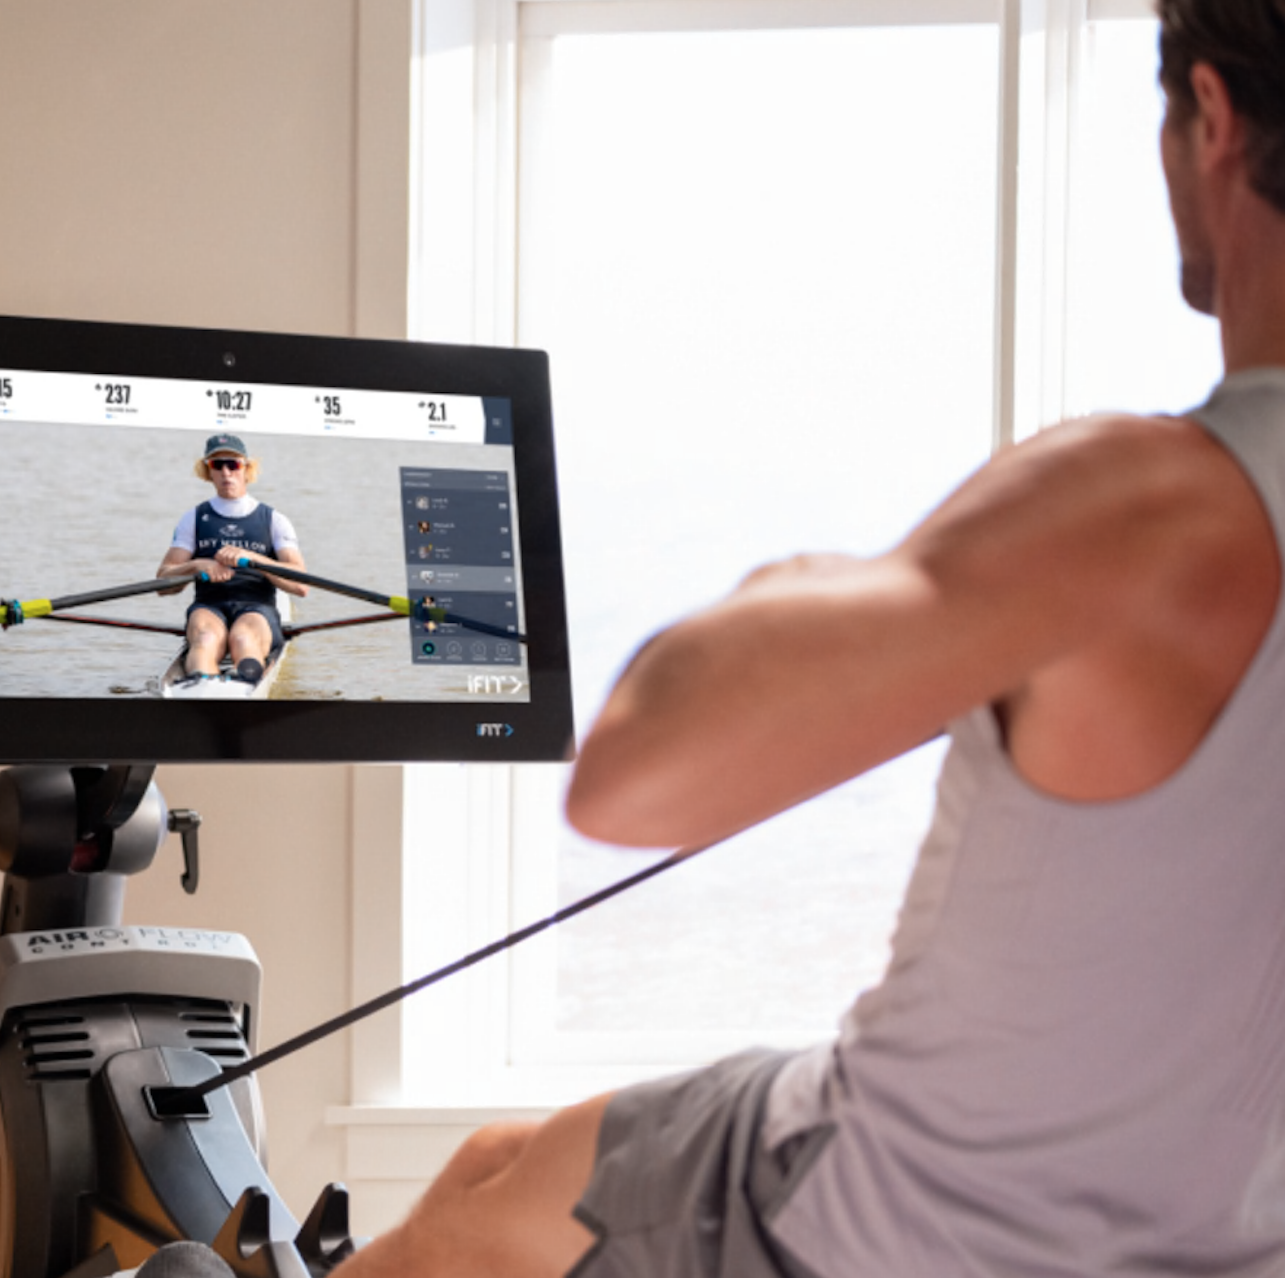 Save $300 on NordicTrack's Top-Rated Indoor Rower This Black Friday